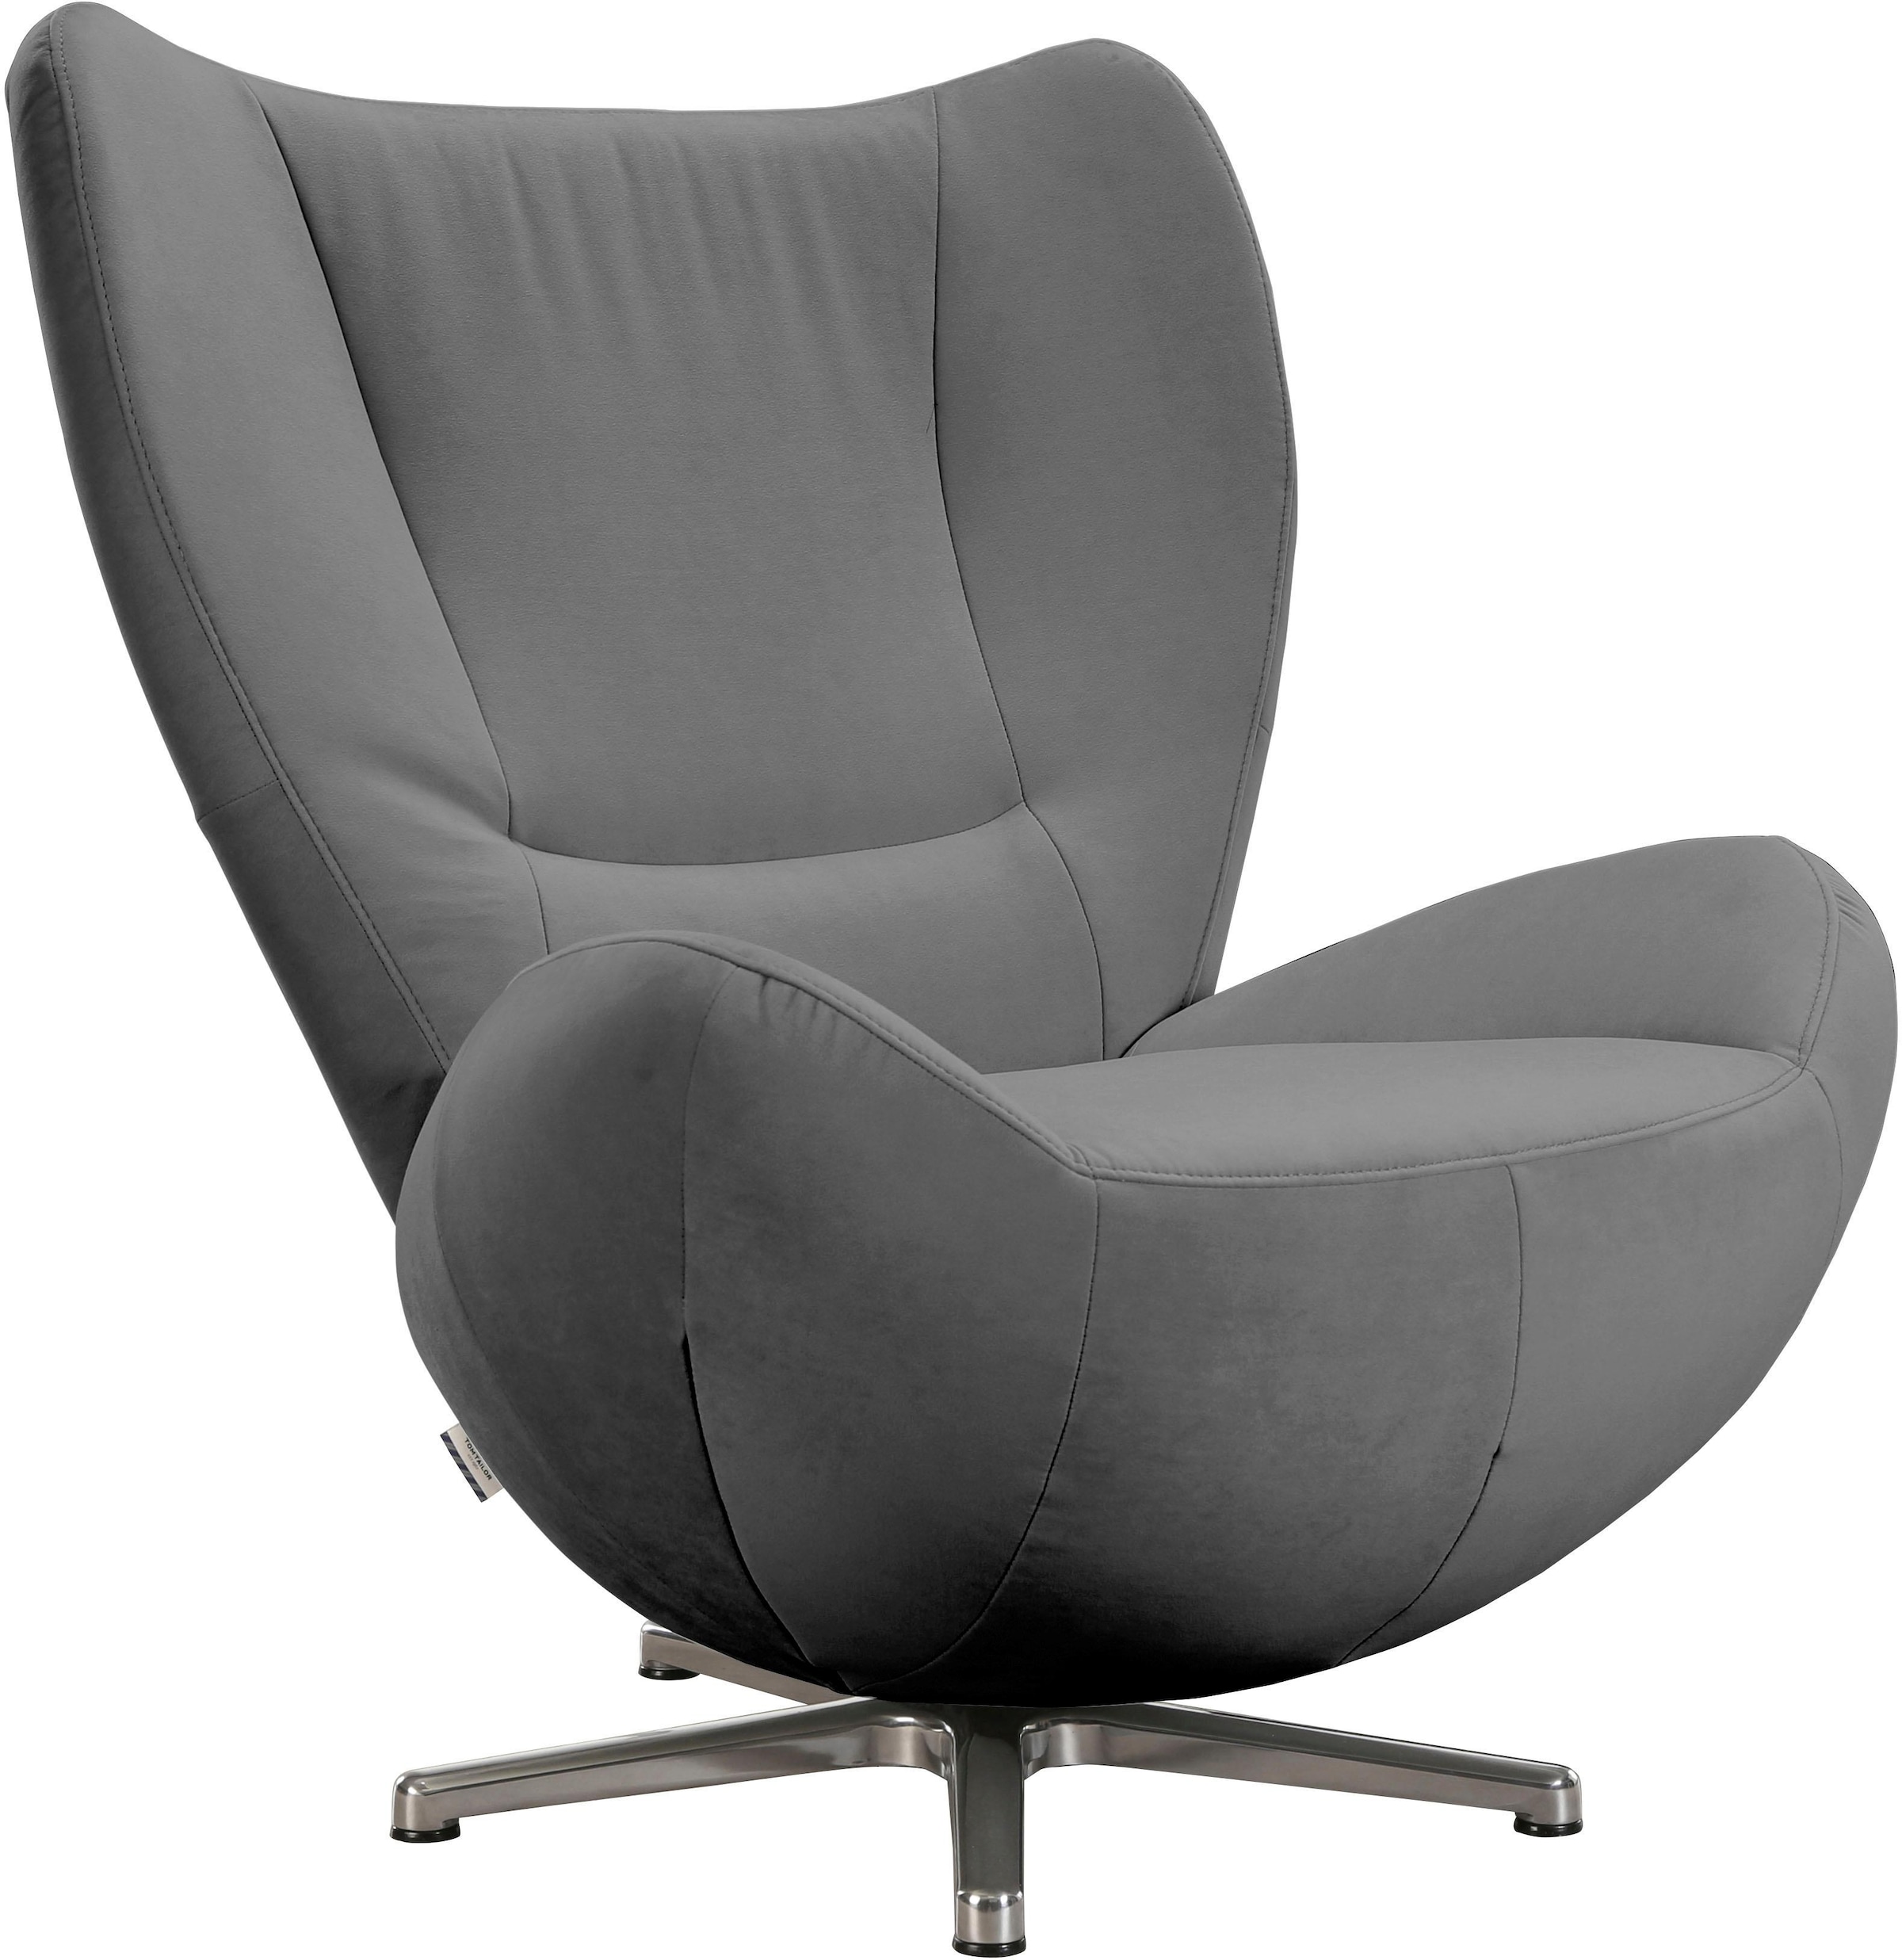 Chrom Metall-Drehfuß Loungesessel | TOM HOME in TAILOR »TOM PURE«, BAUR mit